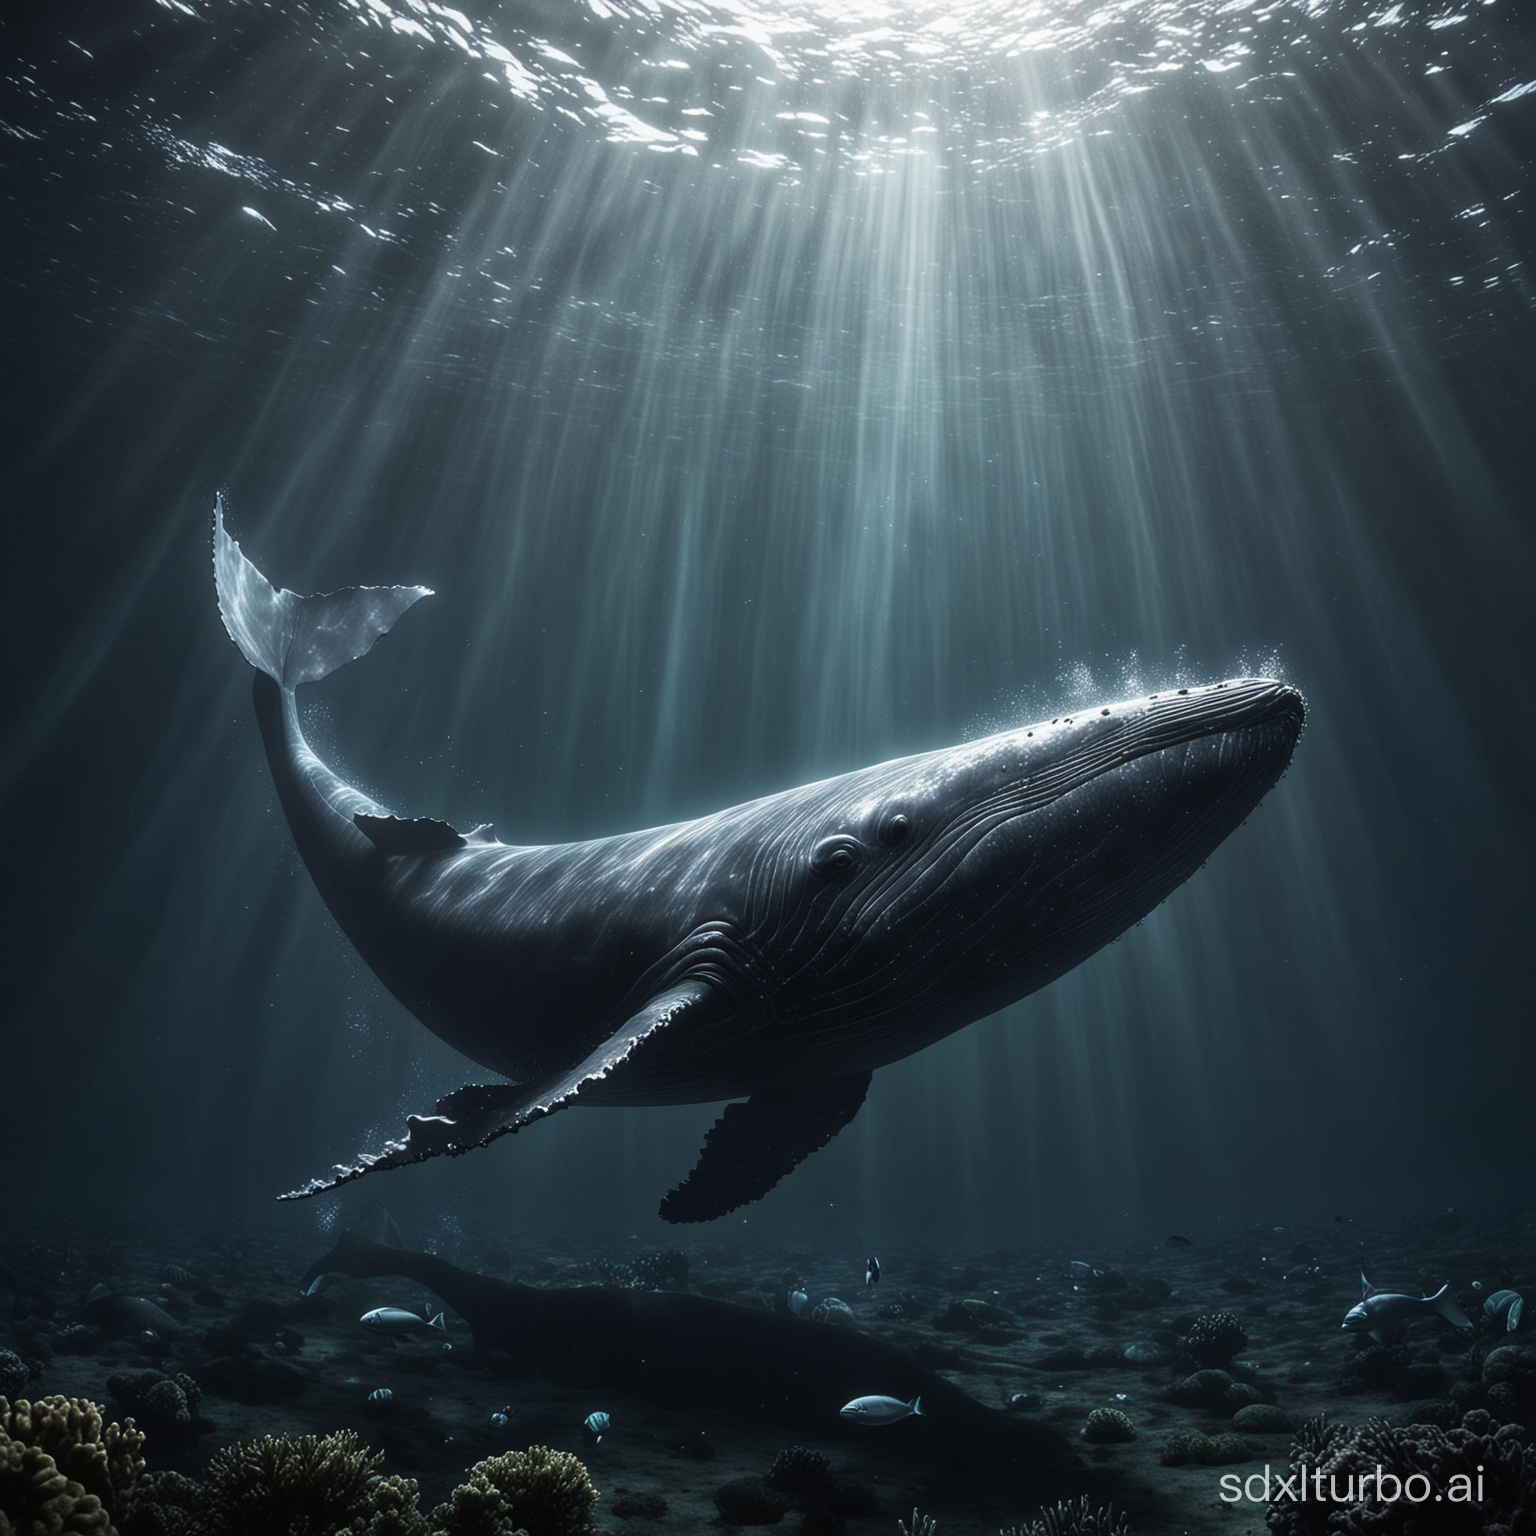 In the deep sea, giant whales swim in the deep sea